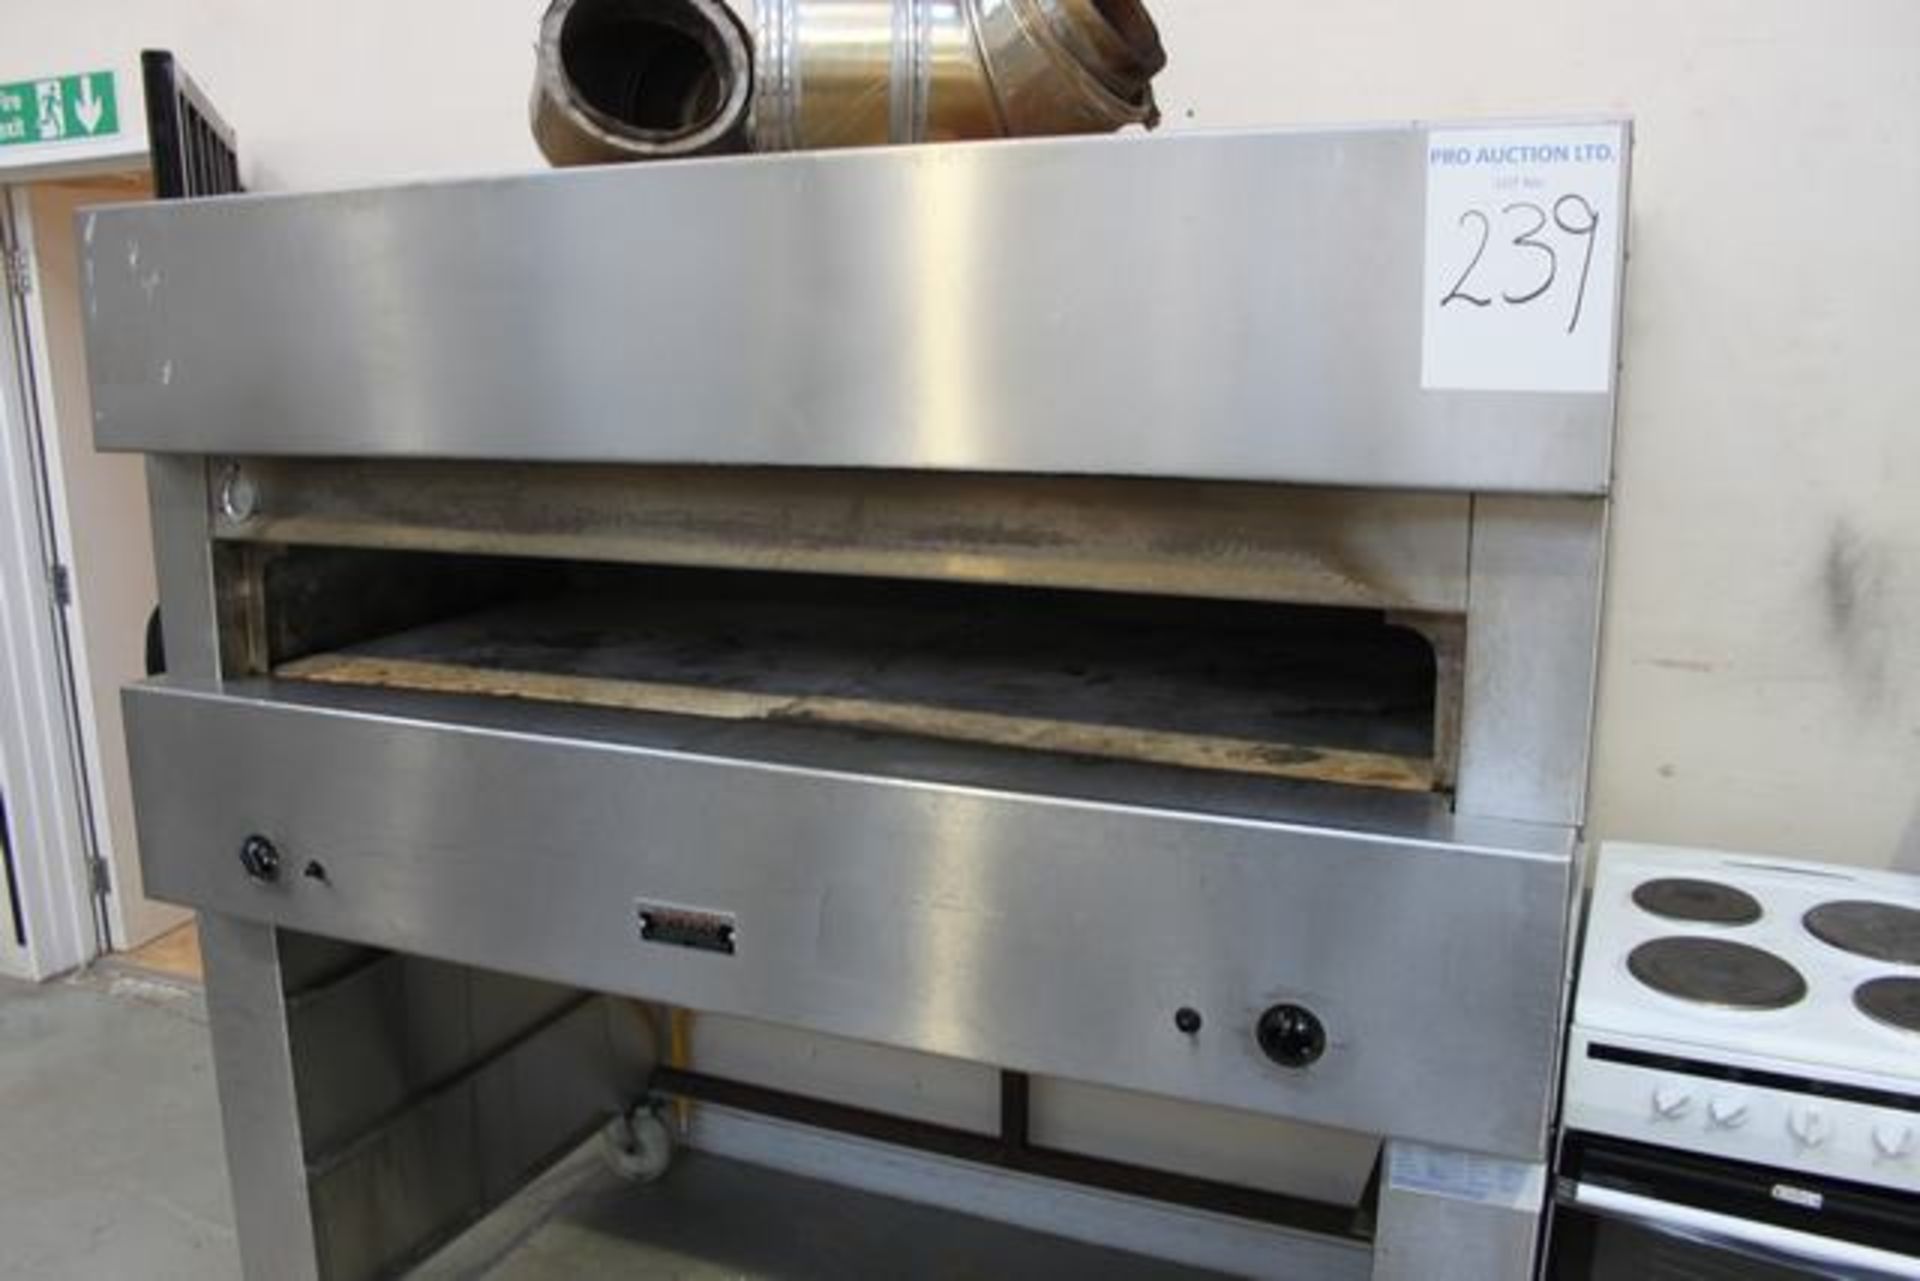 Clayburn 86-AS-488 gas pizza oven 1600mm x 200mm x 700mm deep temperature high Setting 26.5kw / 86, - Image 3 of 5